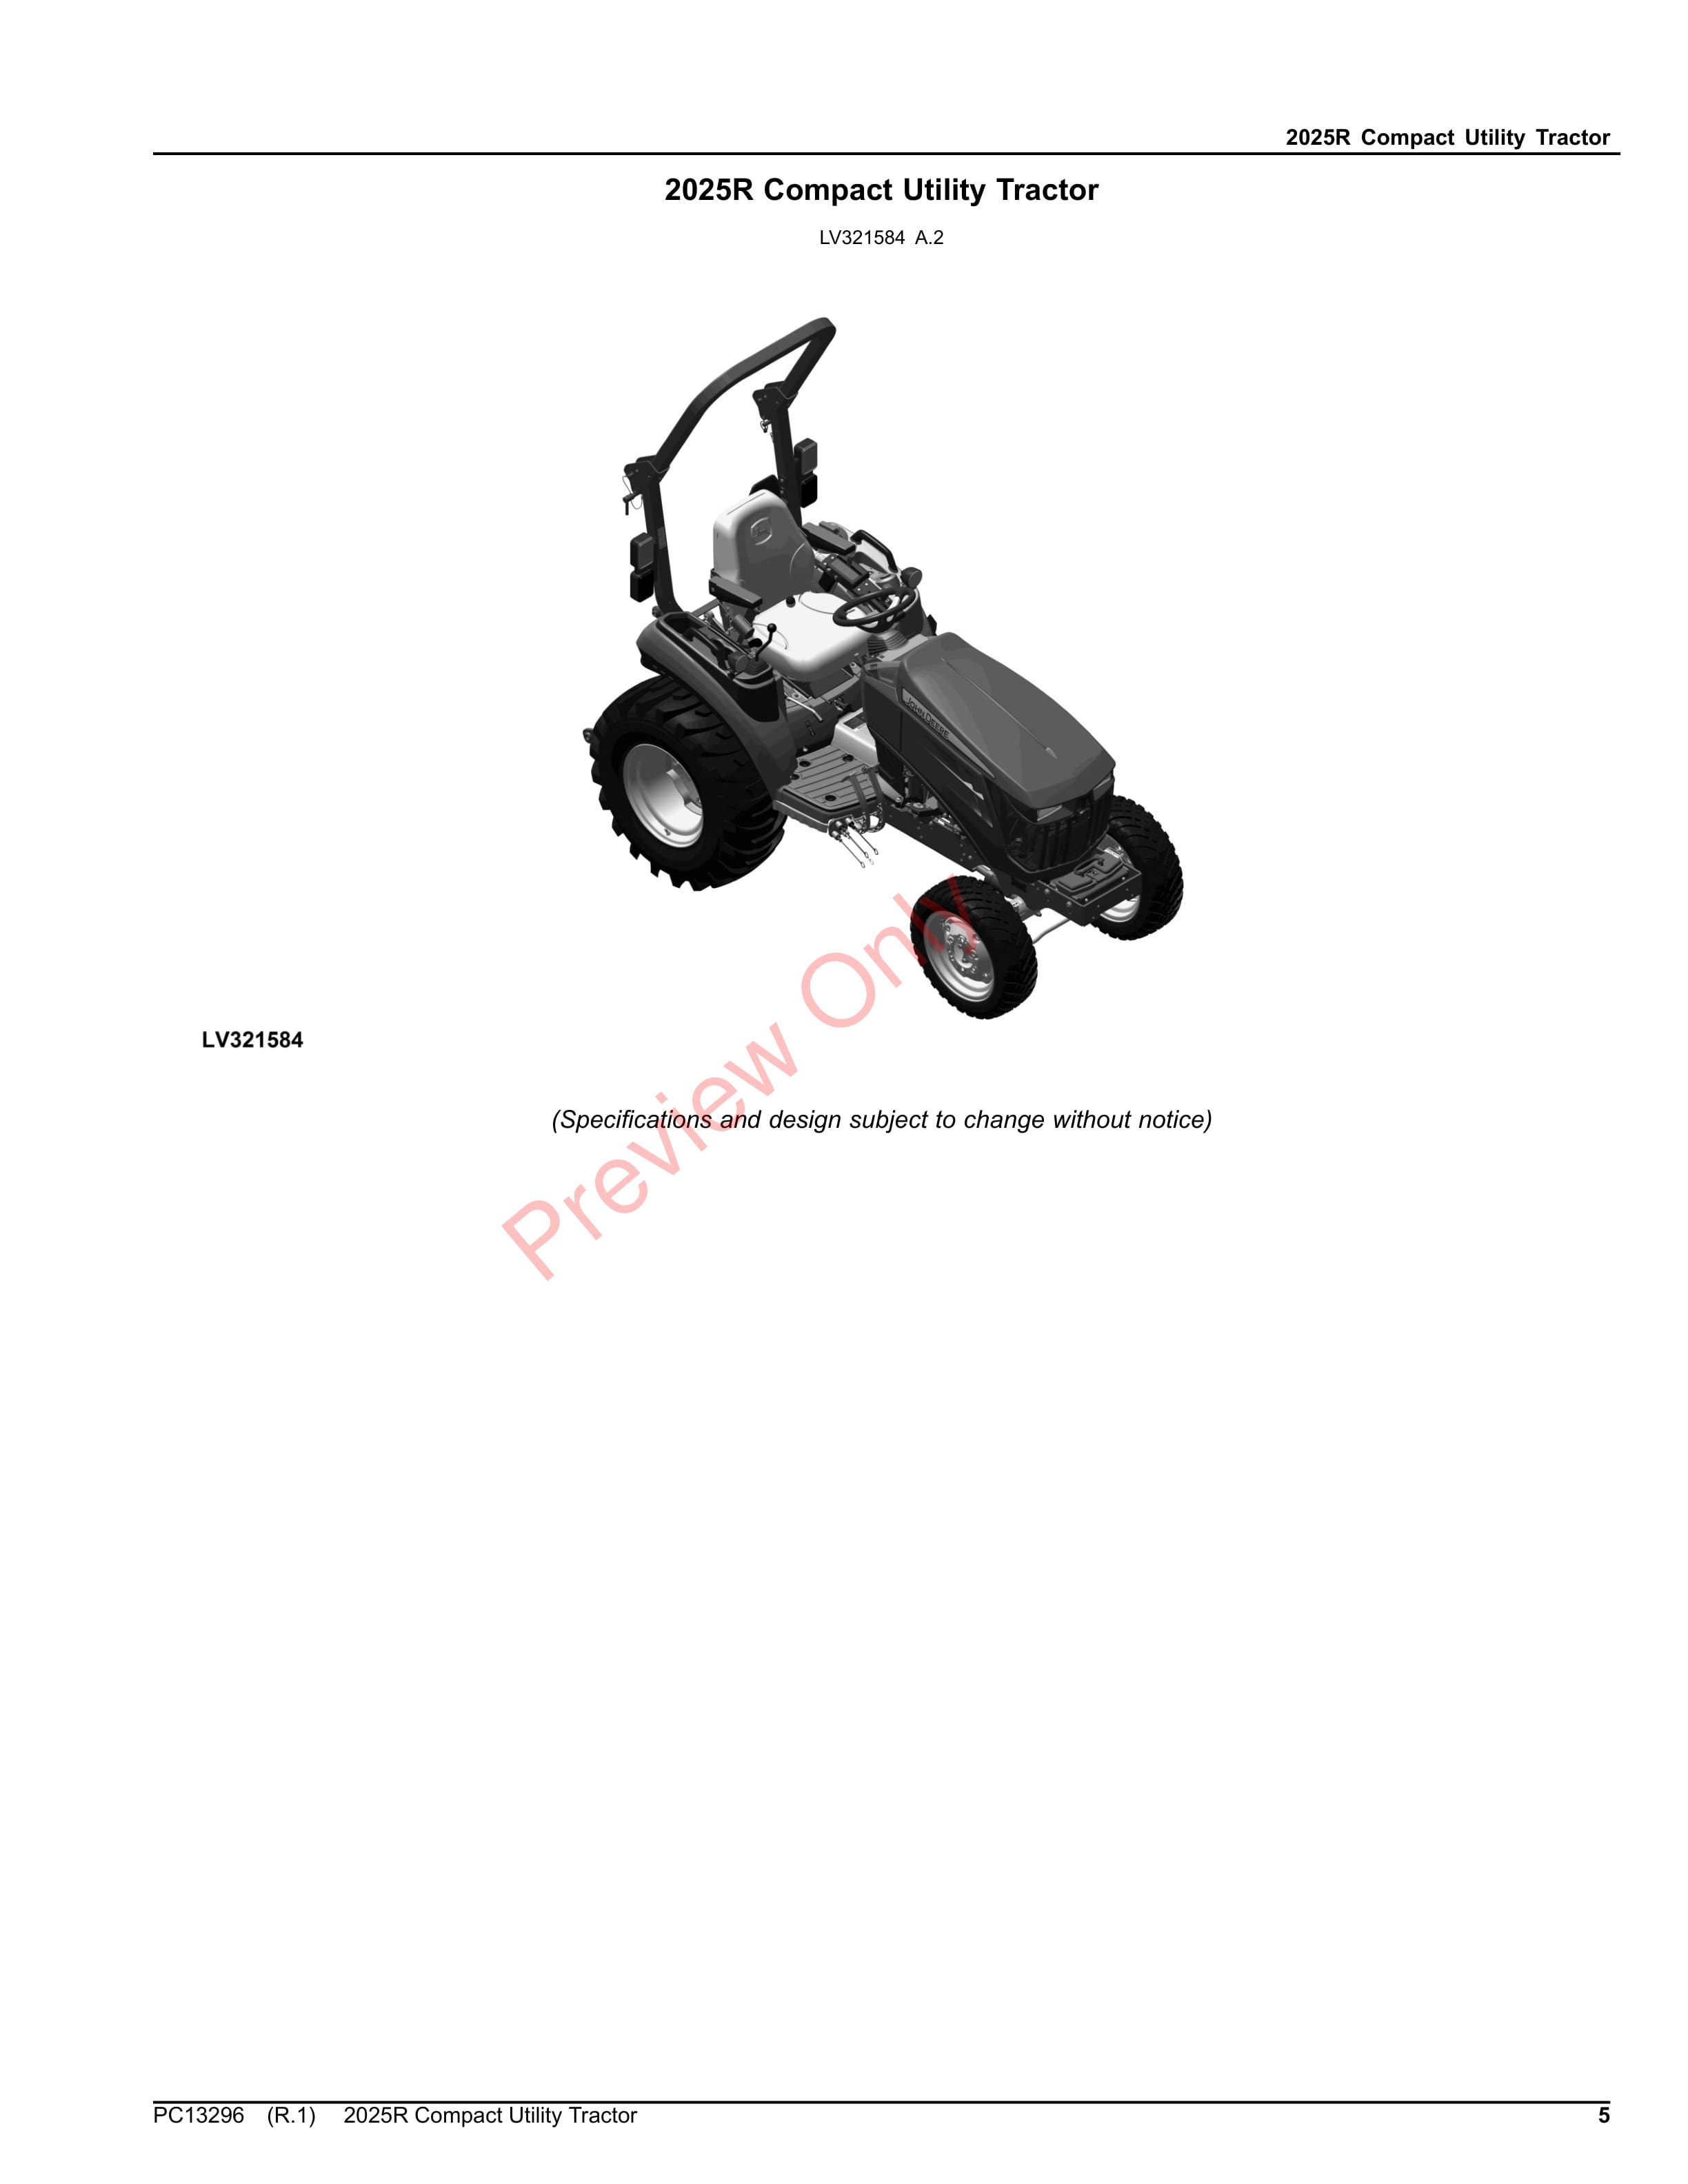 John Deere 2025R Compact Utility Tractor (1LV2025RCHH100001- ) Parts Catalog PC13296 19OCT23-5